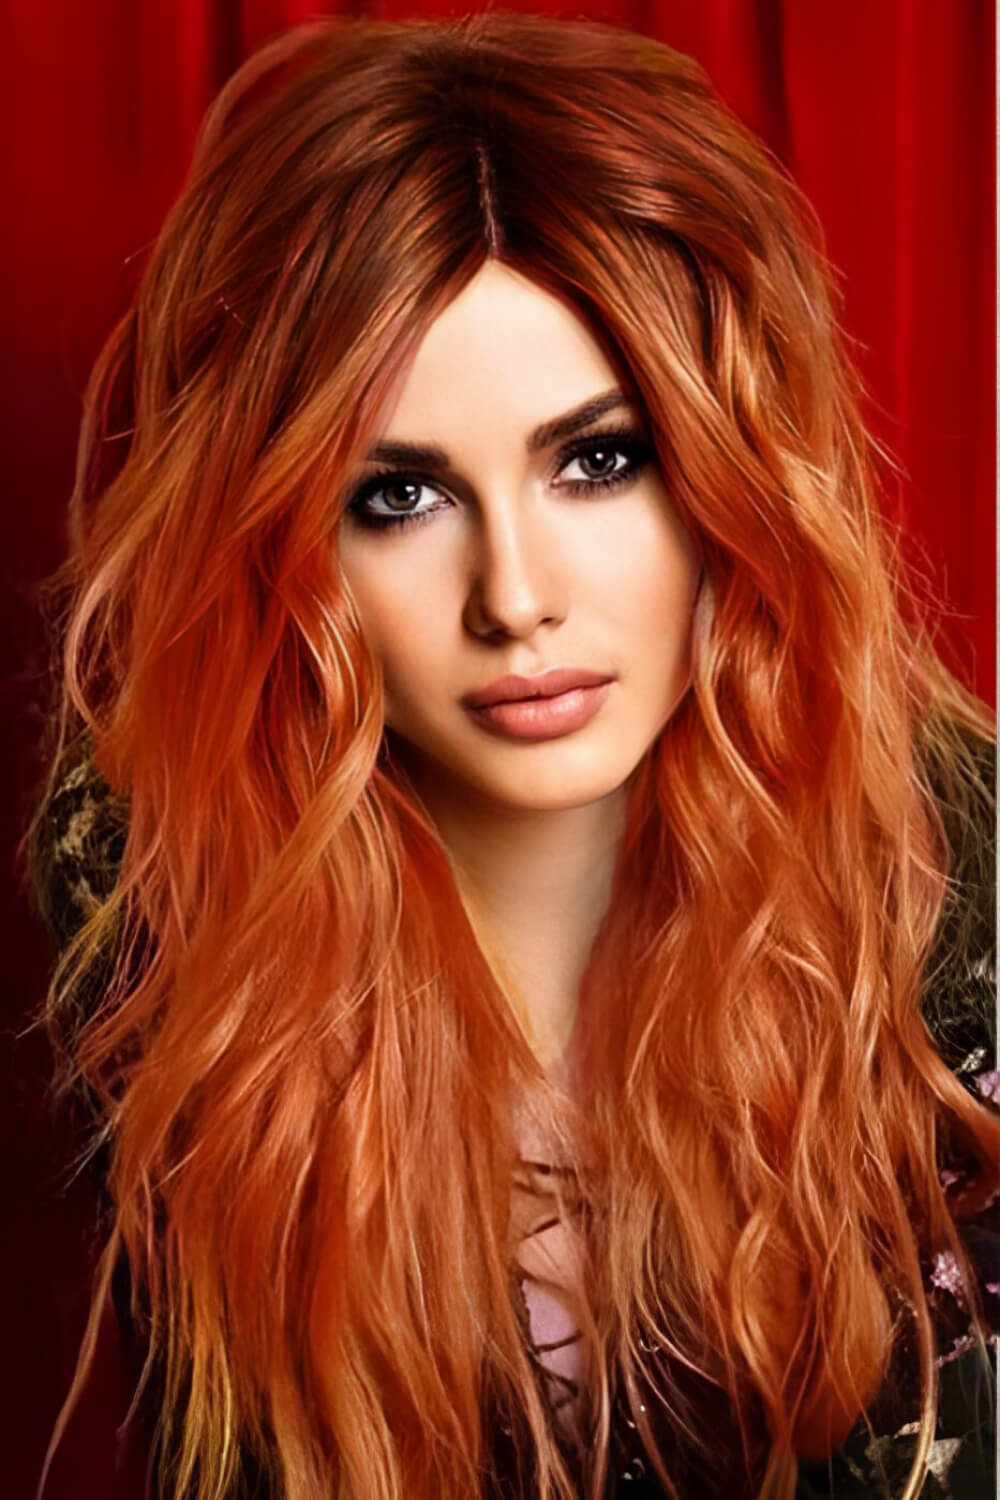 13*2" Women's Lace Front Wigs Synthetic Long Wave 24" 150% Density